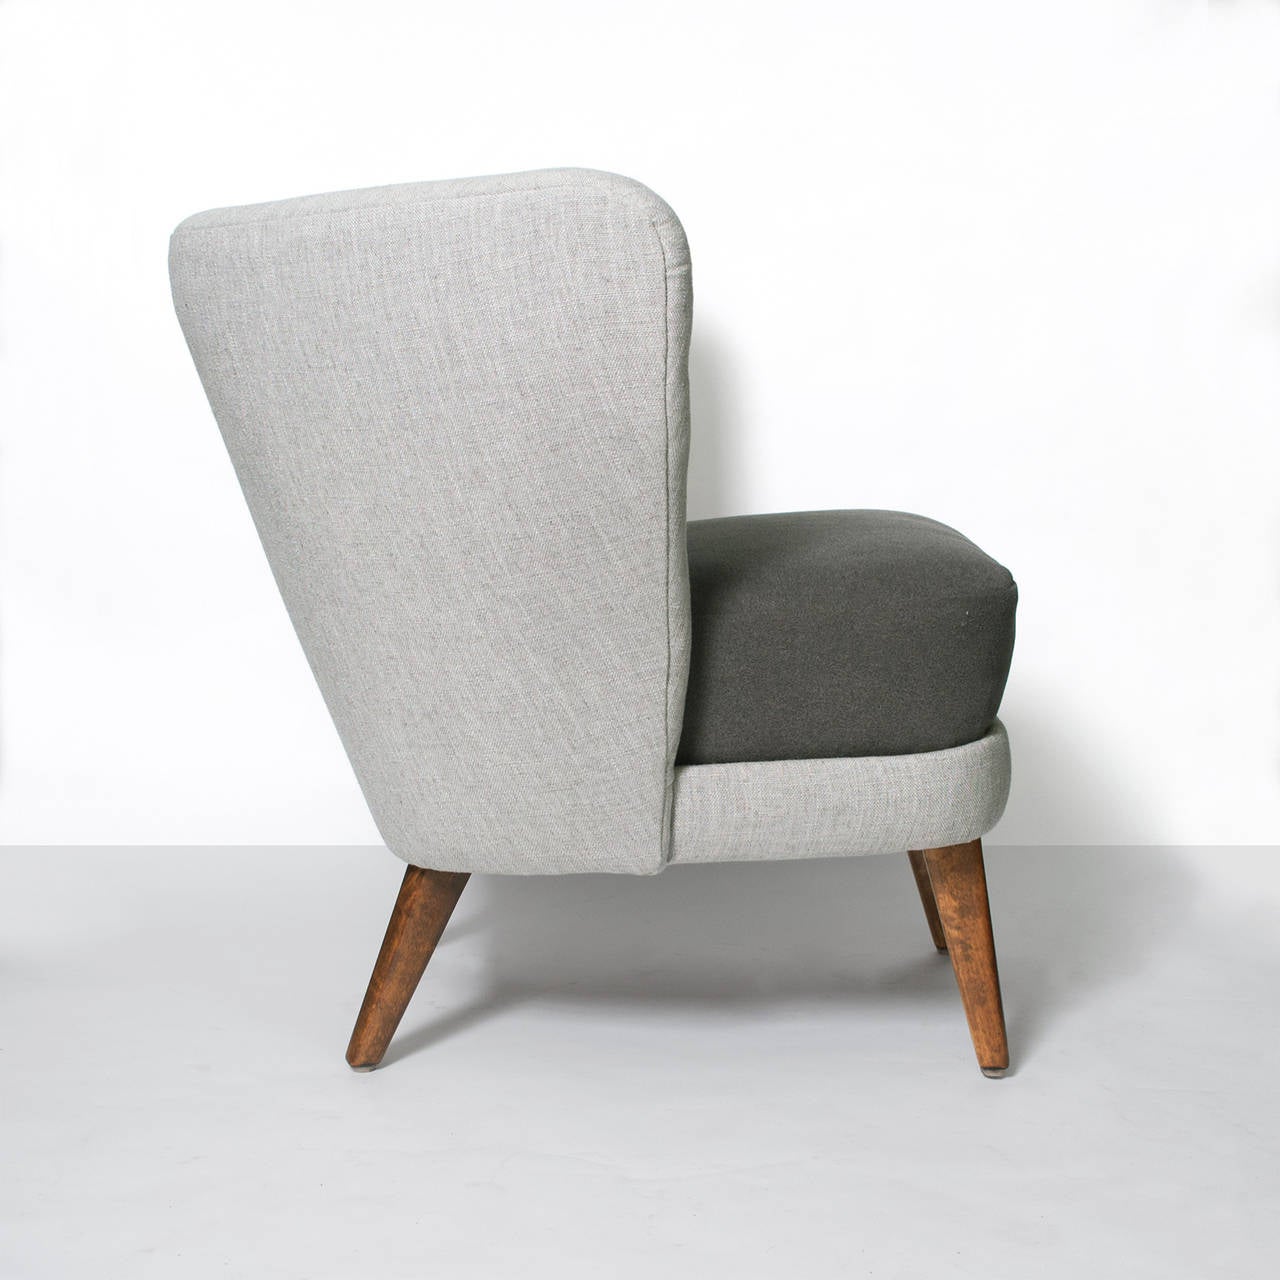 Carved Scandinavian Modern wrap wing chair with internal carved wood arms.